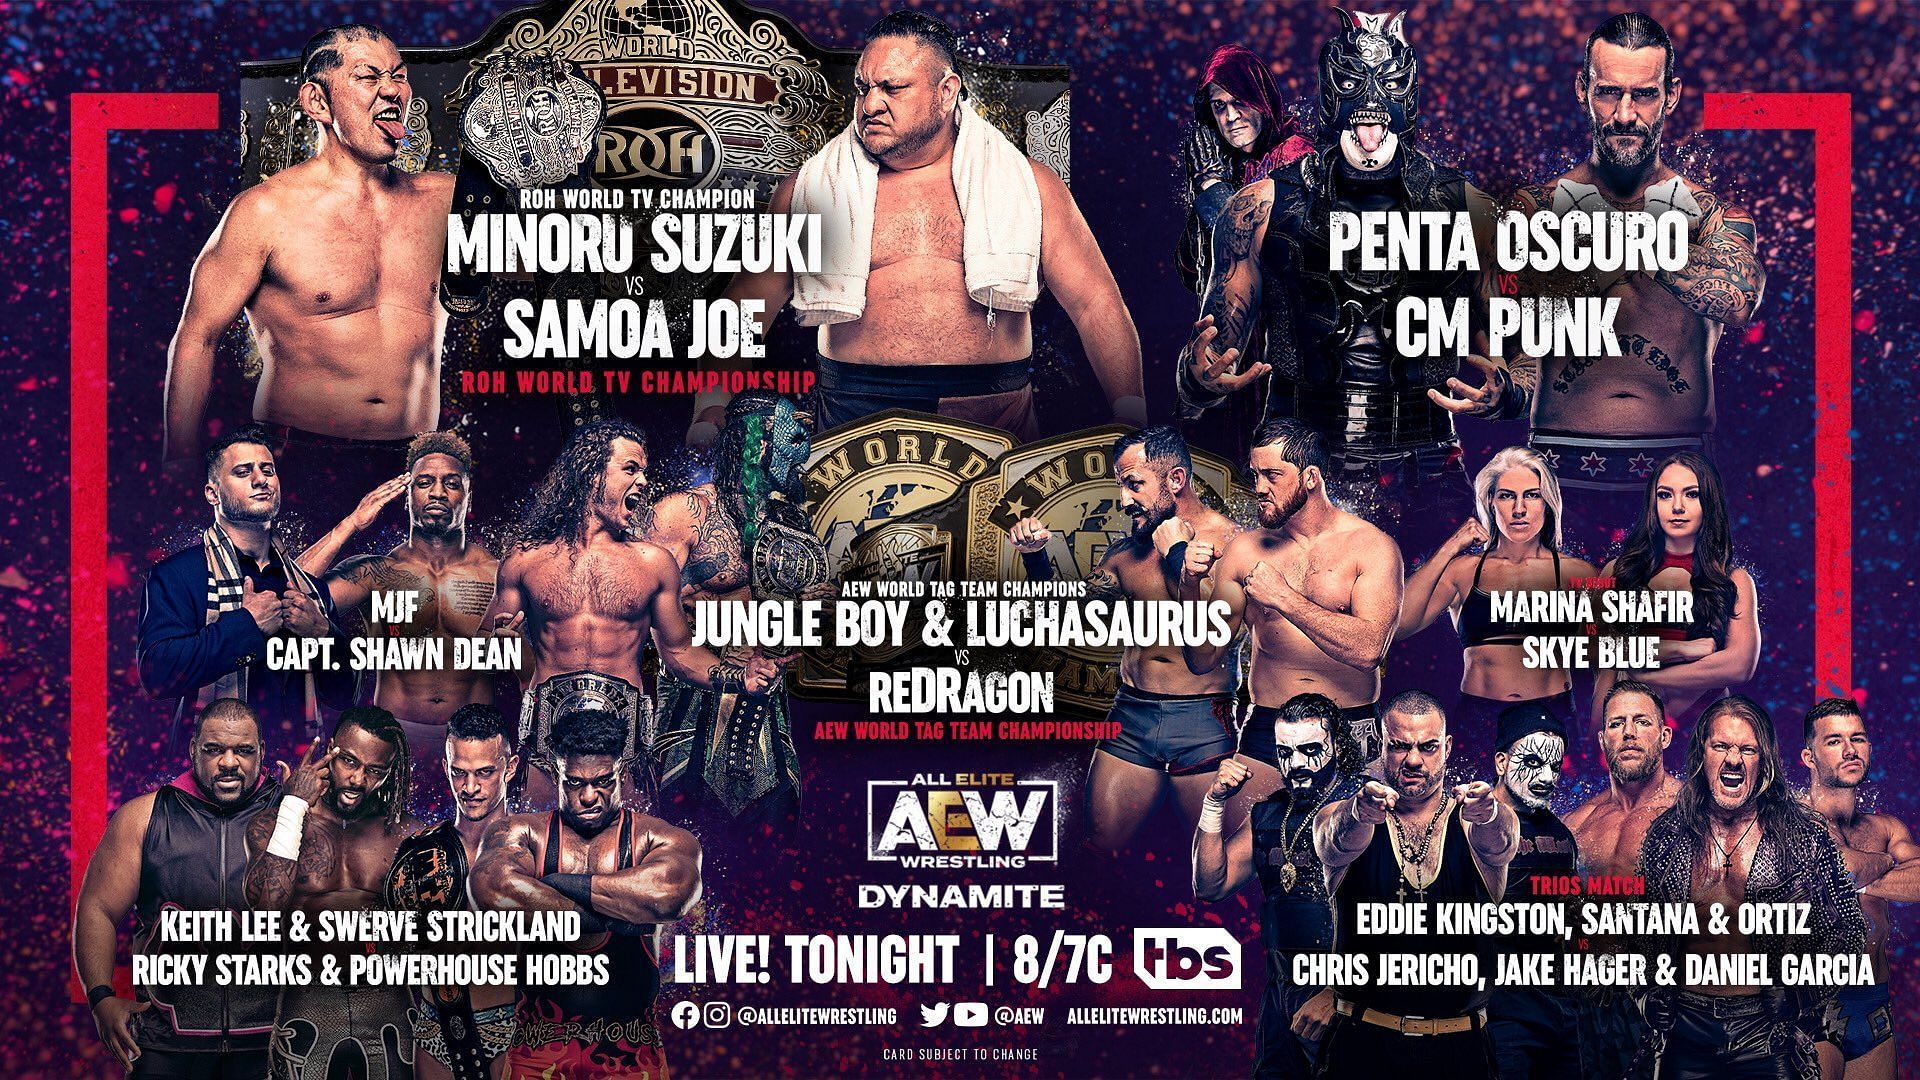 The AEW Dynamite card was stacked once again this week.